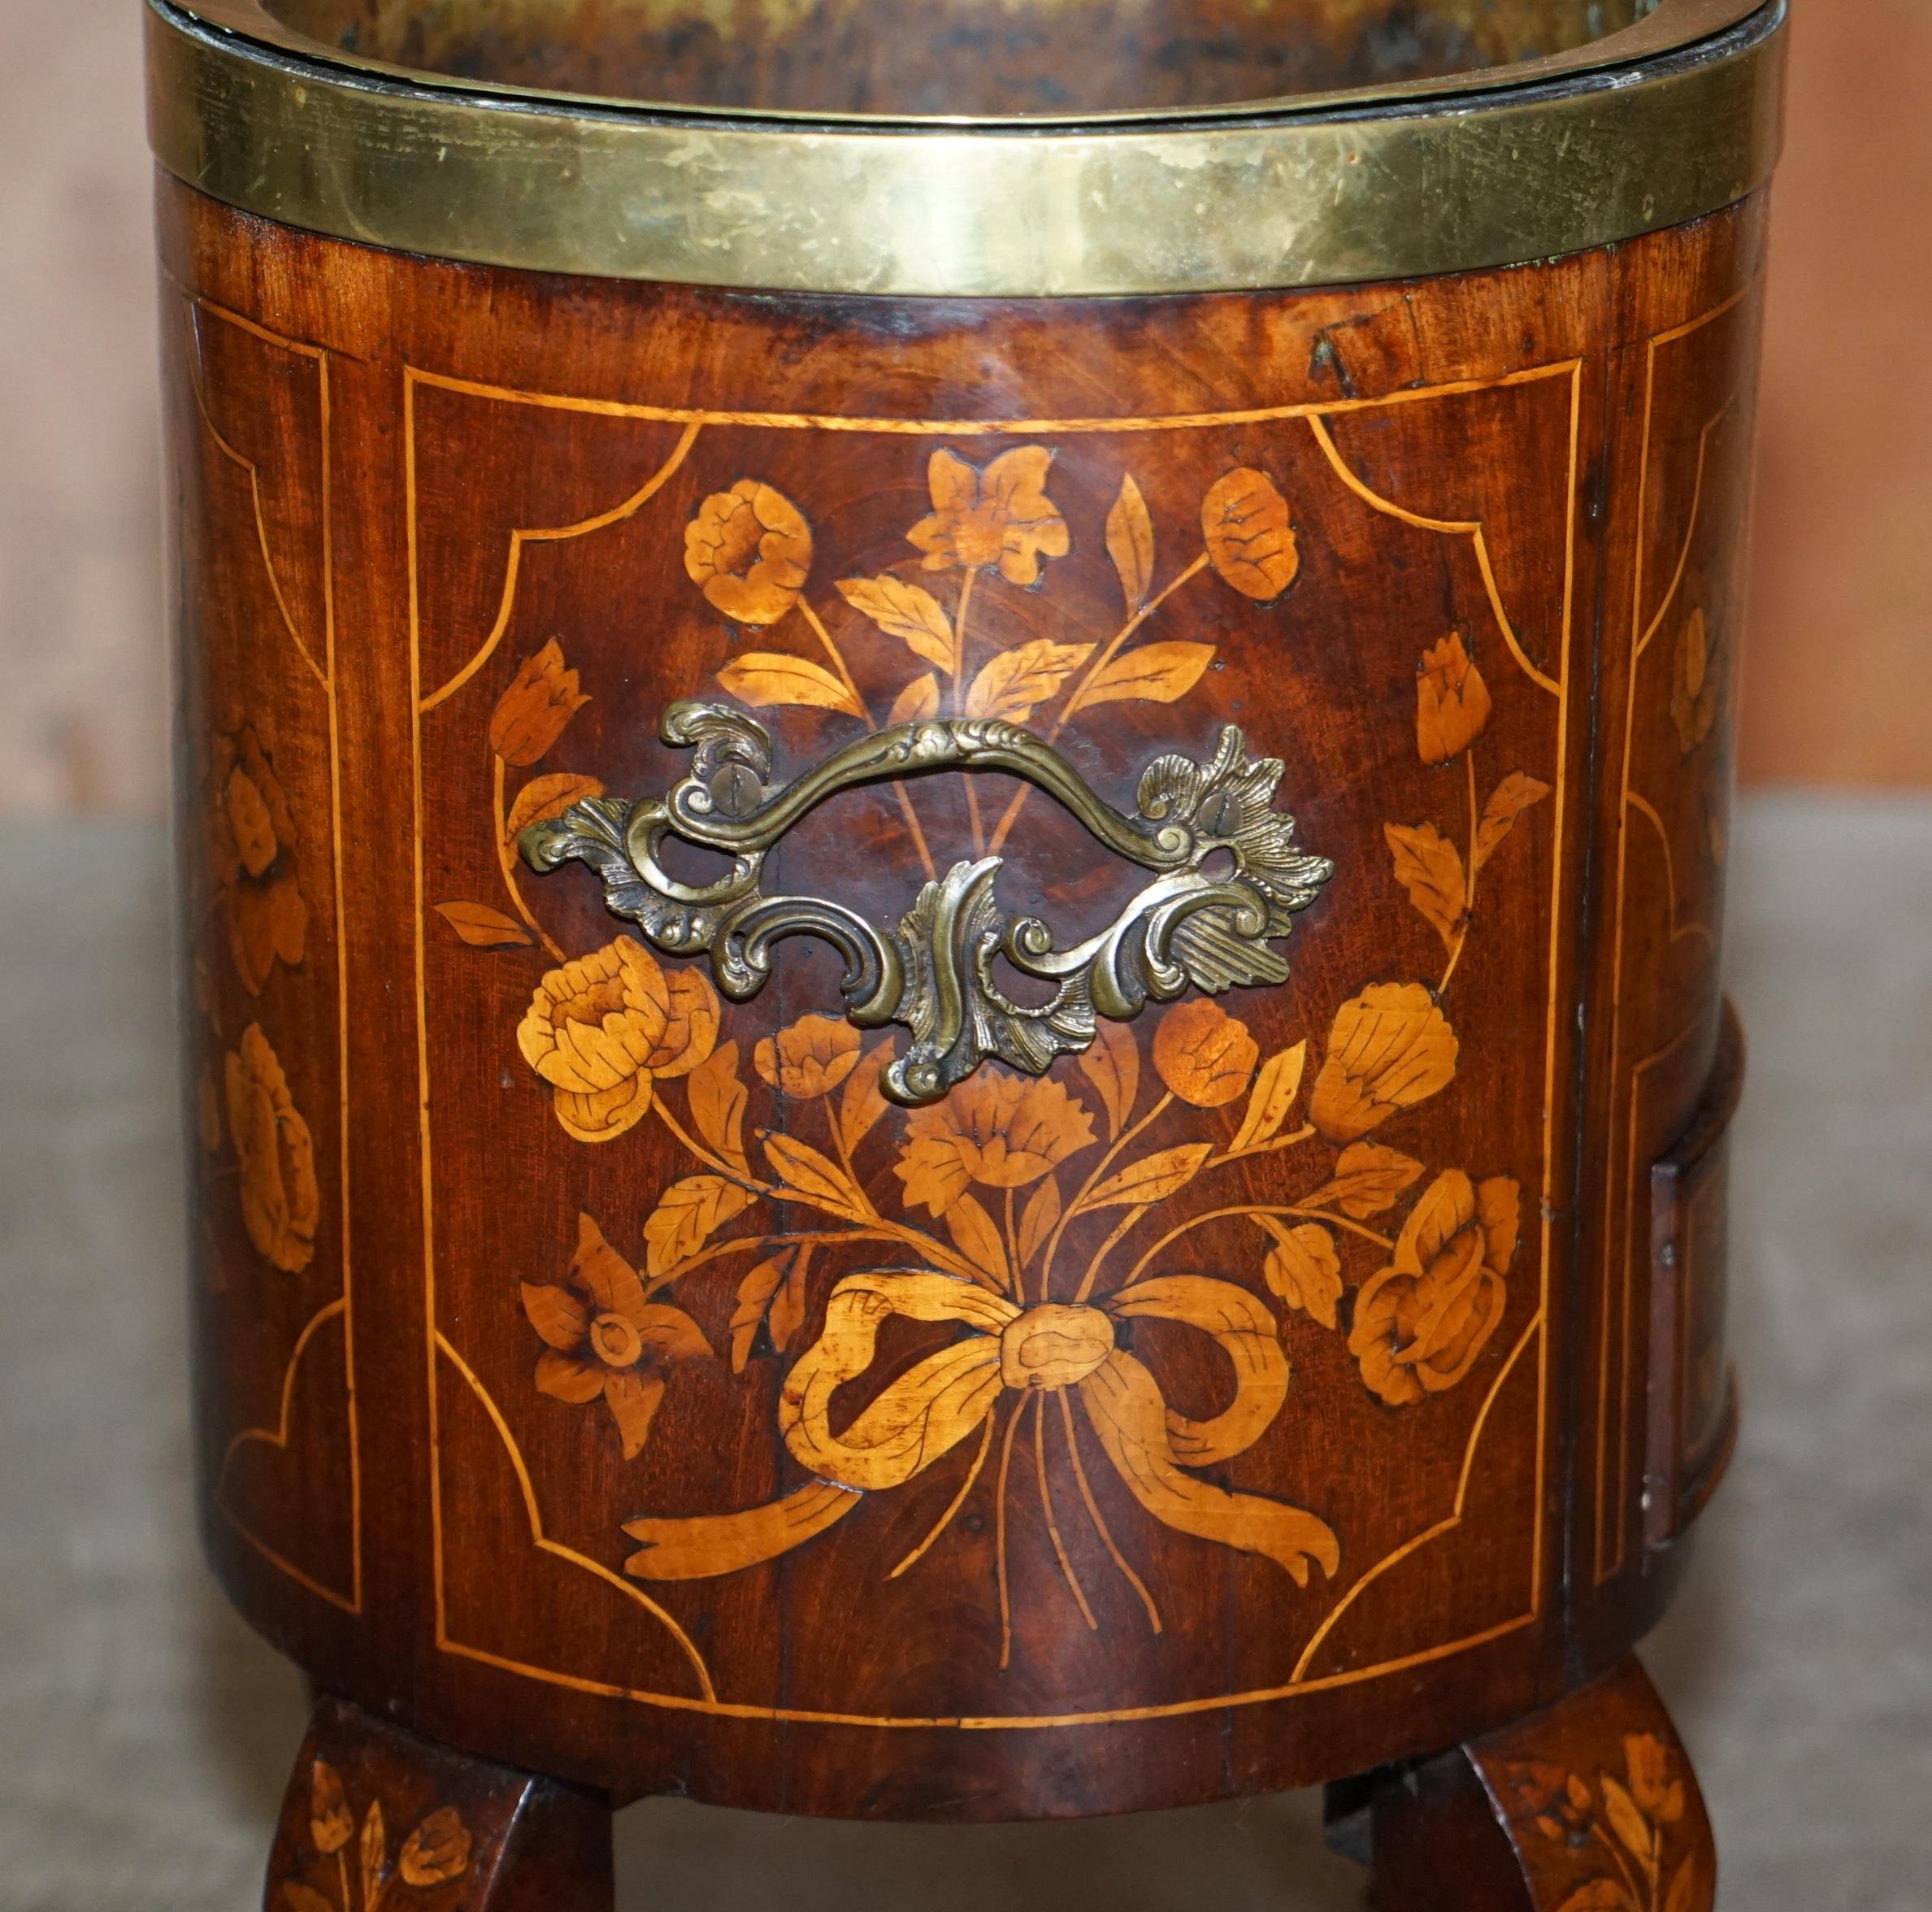 Exquisite Antique circa 1800 Dutch Inlaid Wine Cooler Bucket Claw & Ball Feet For Sale 8